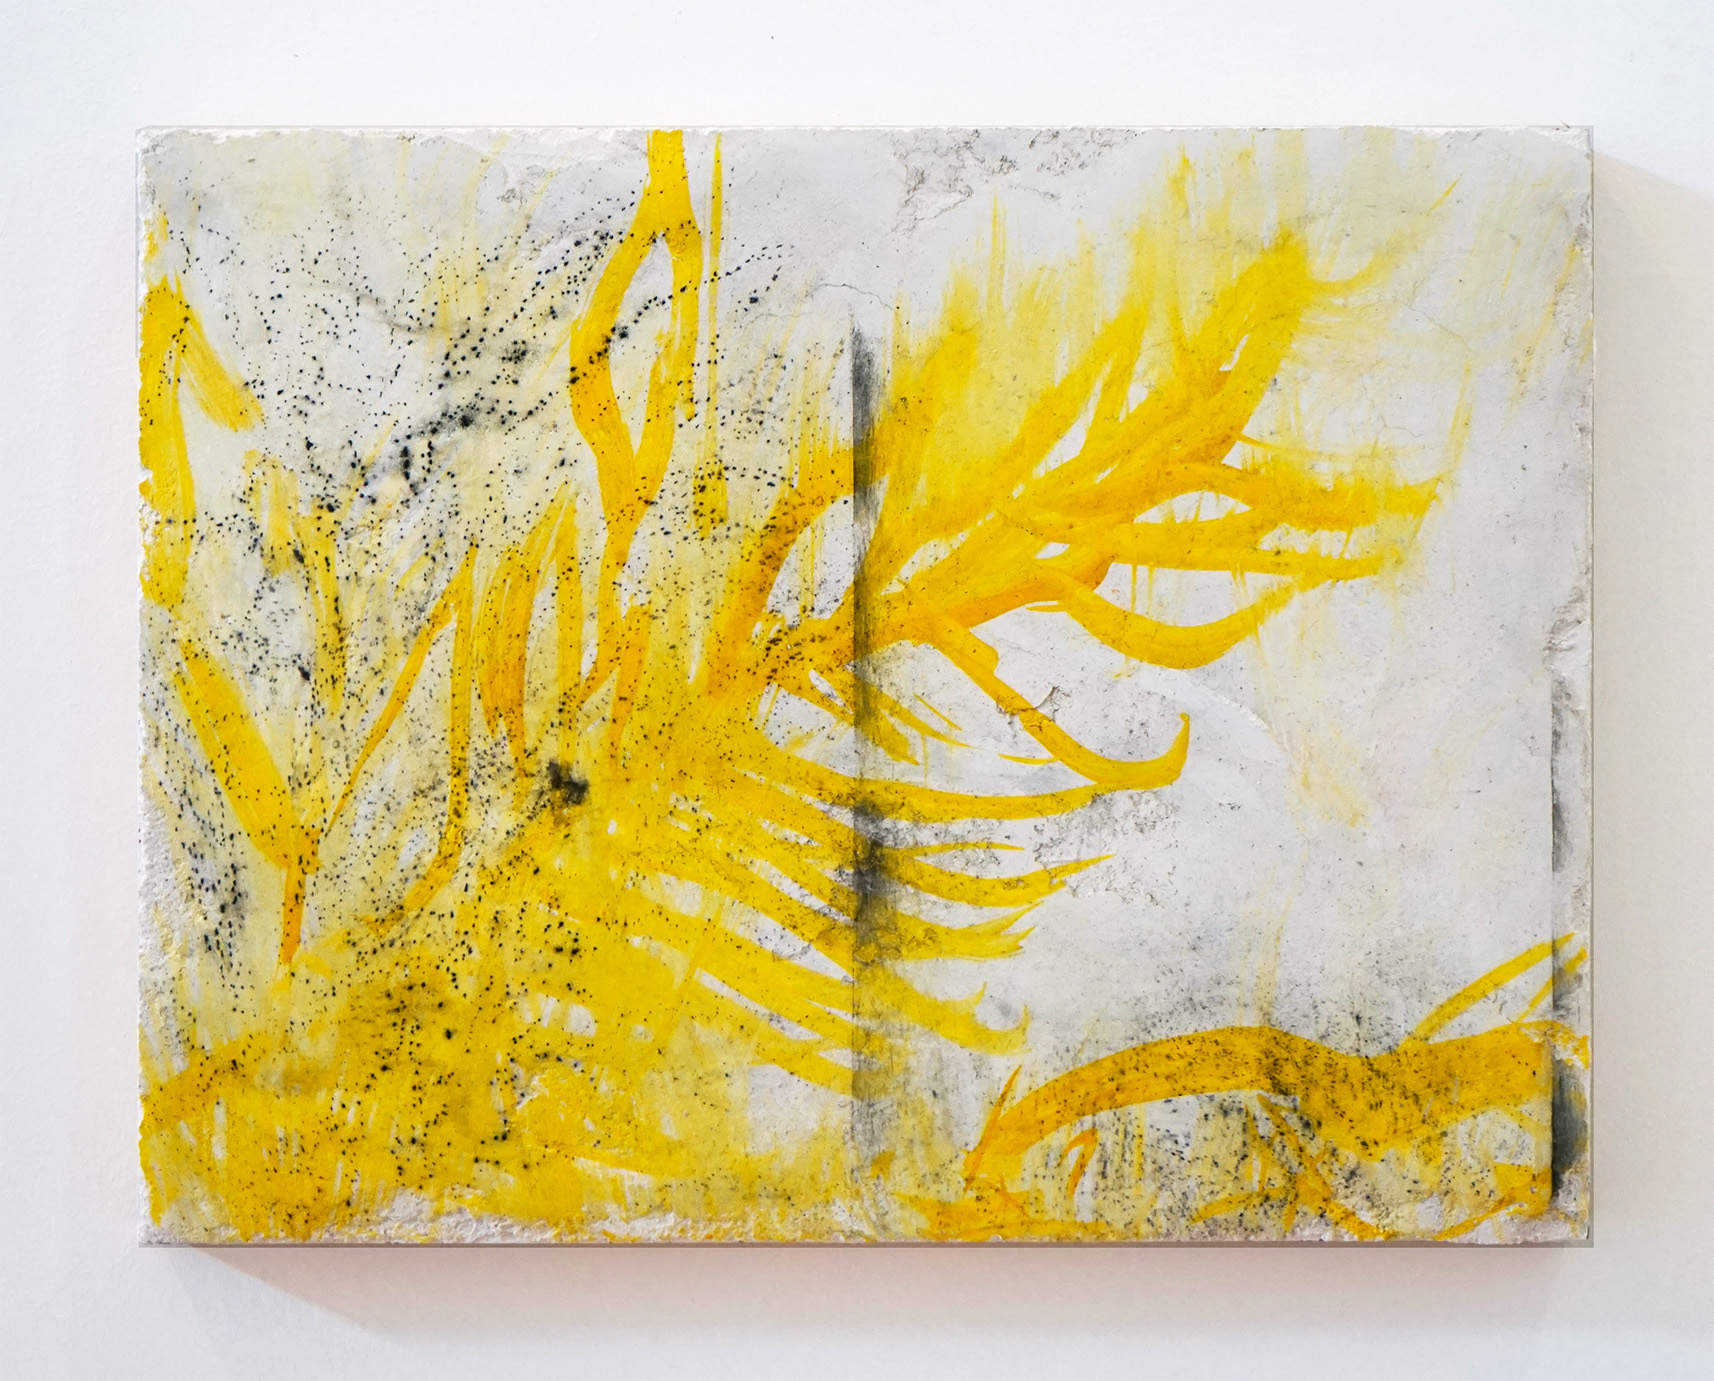 Chafa Ghaddar, Letter with yellow and charcoal, 2021, fresque sur bois, 32 x 42 cm